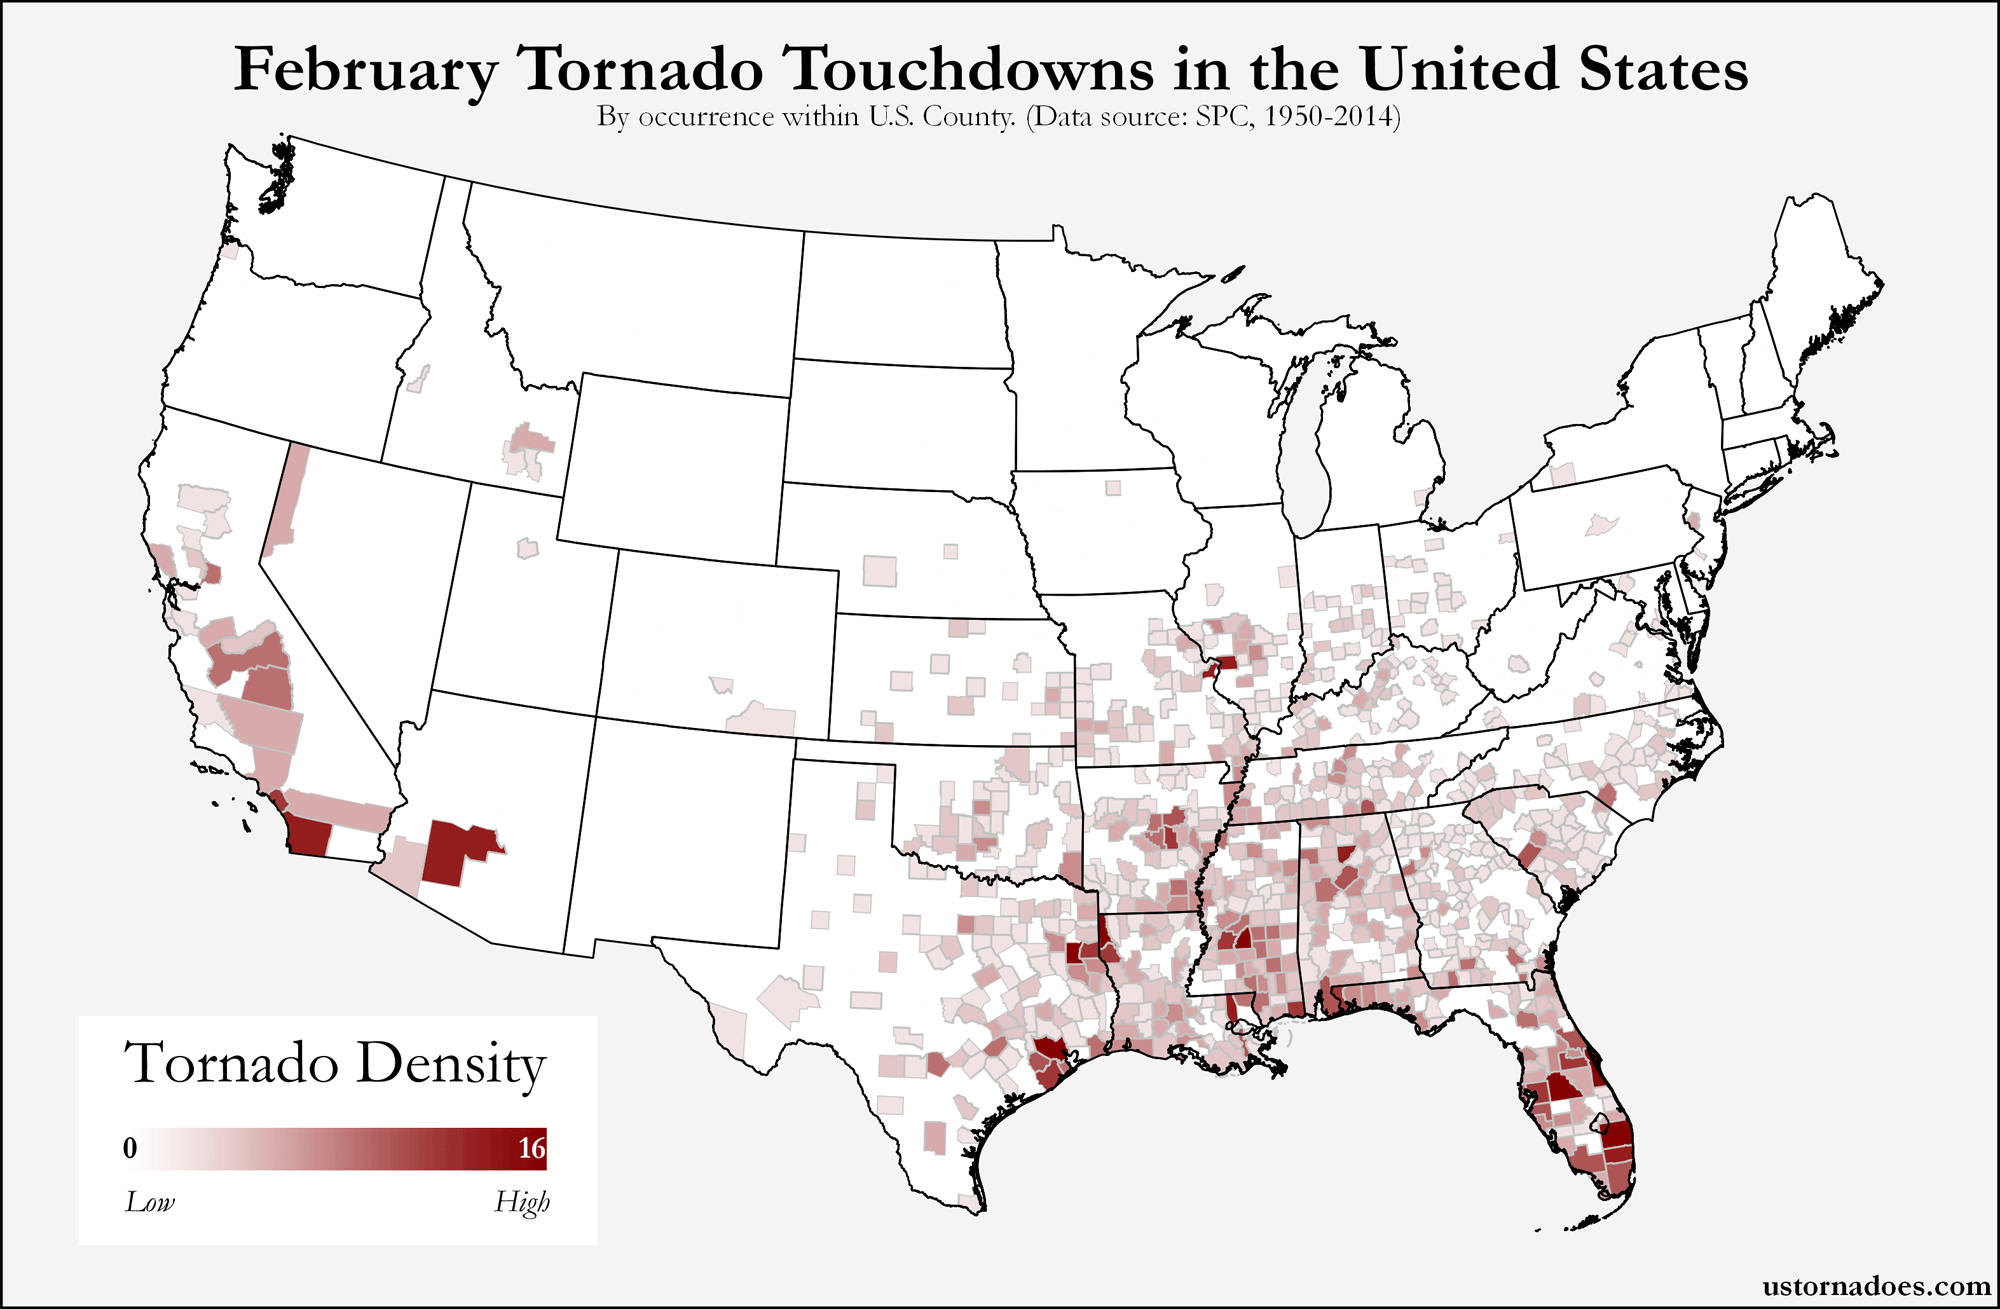 Here’s where tornadoes typically form in February across the United States